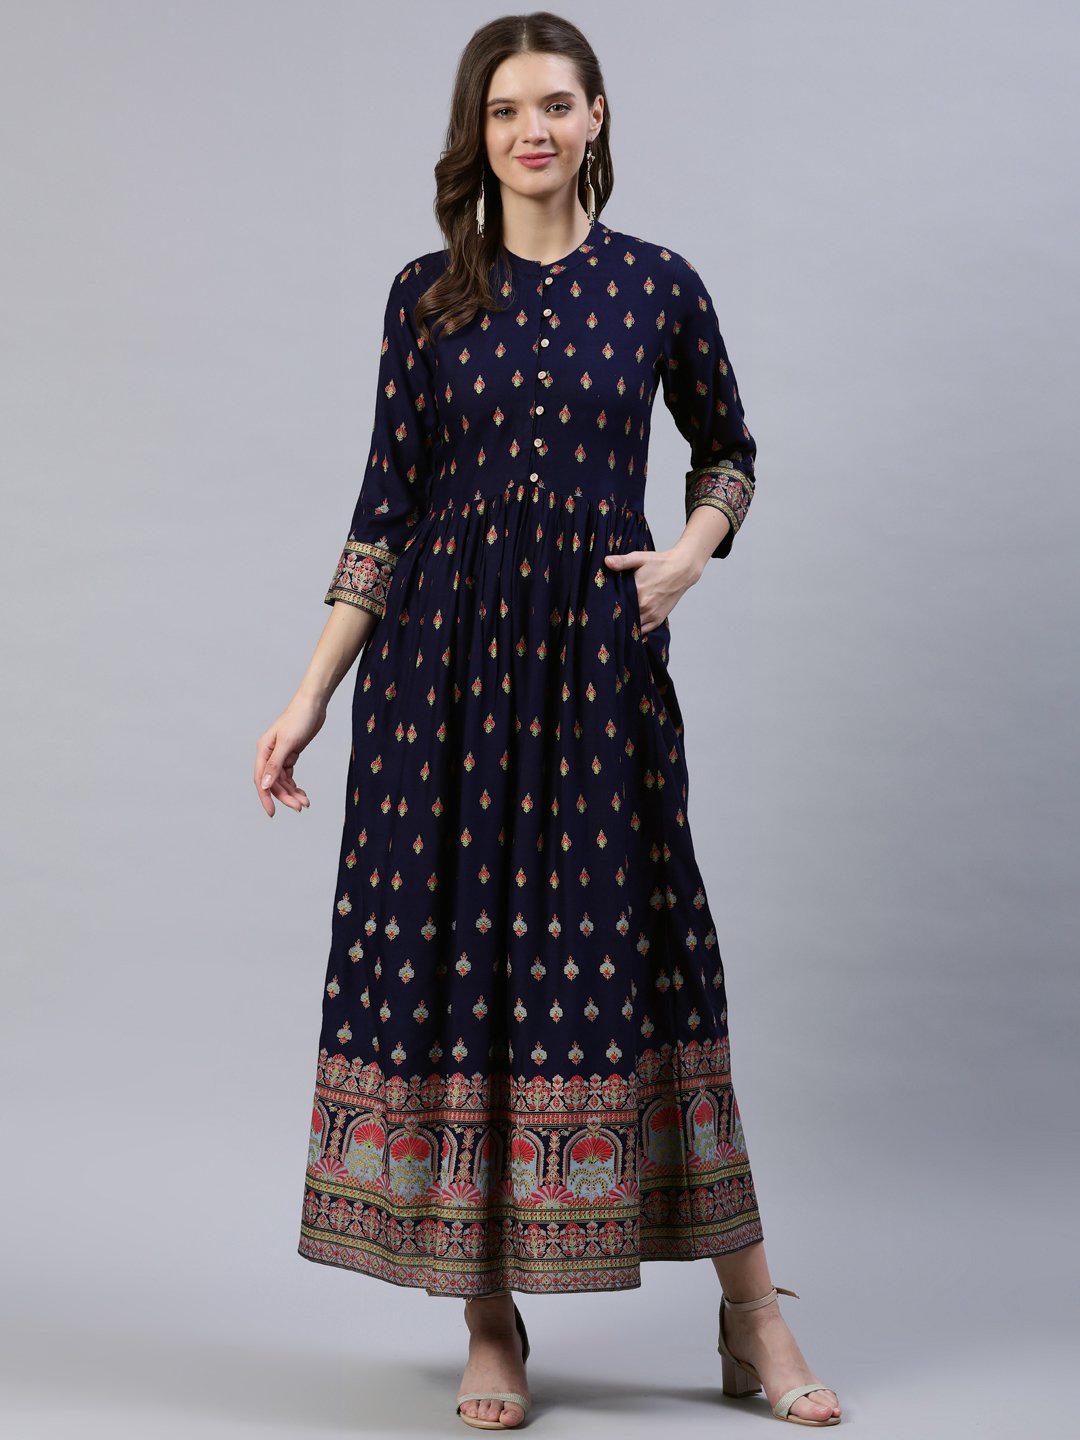 Women's Navy Blue Printed Dress With Three Quarter Sleeves - Nayo Clothing